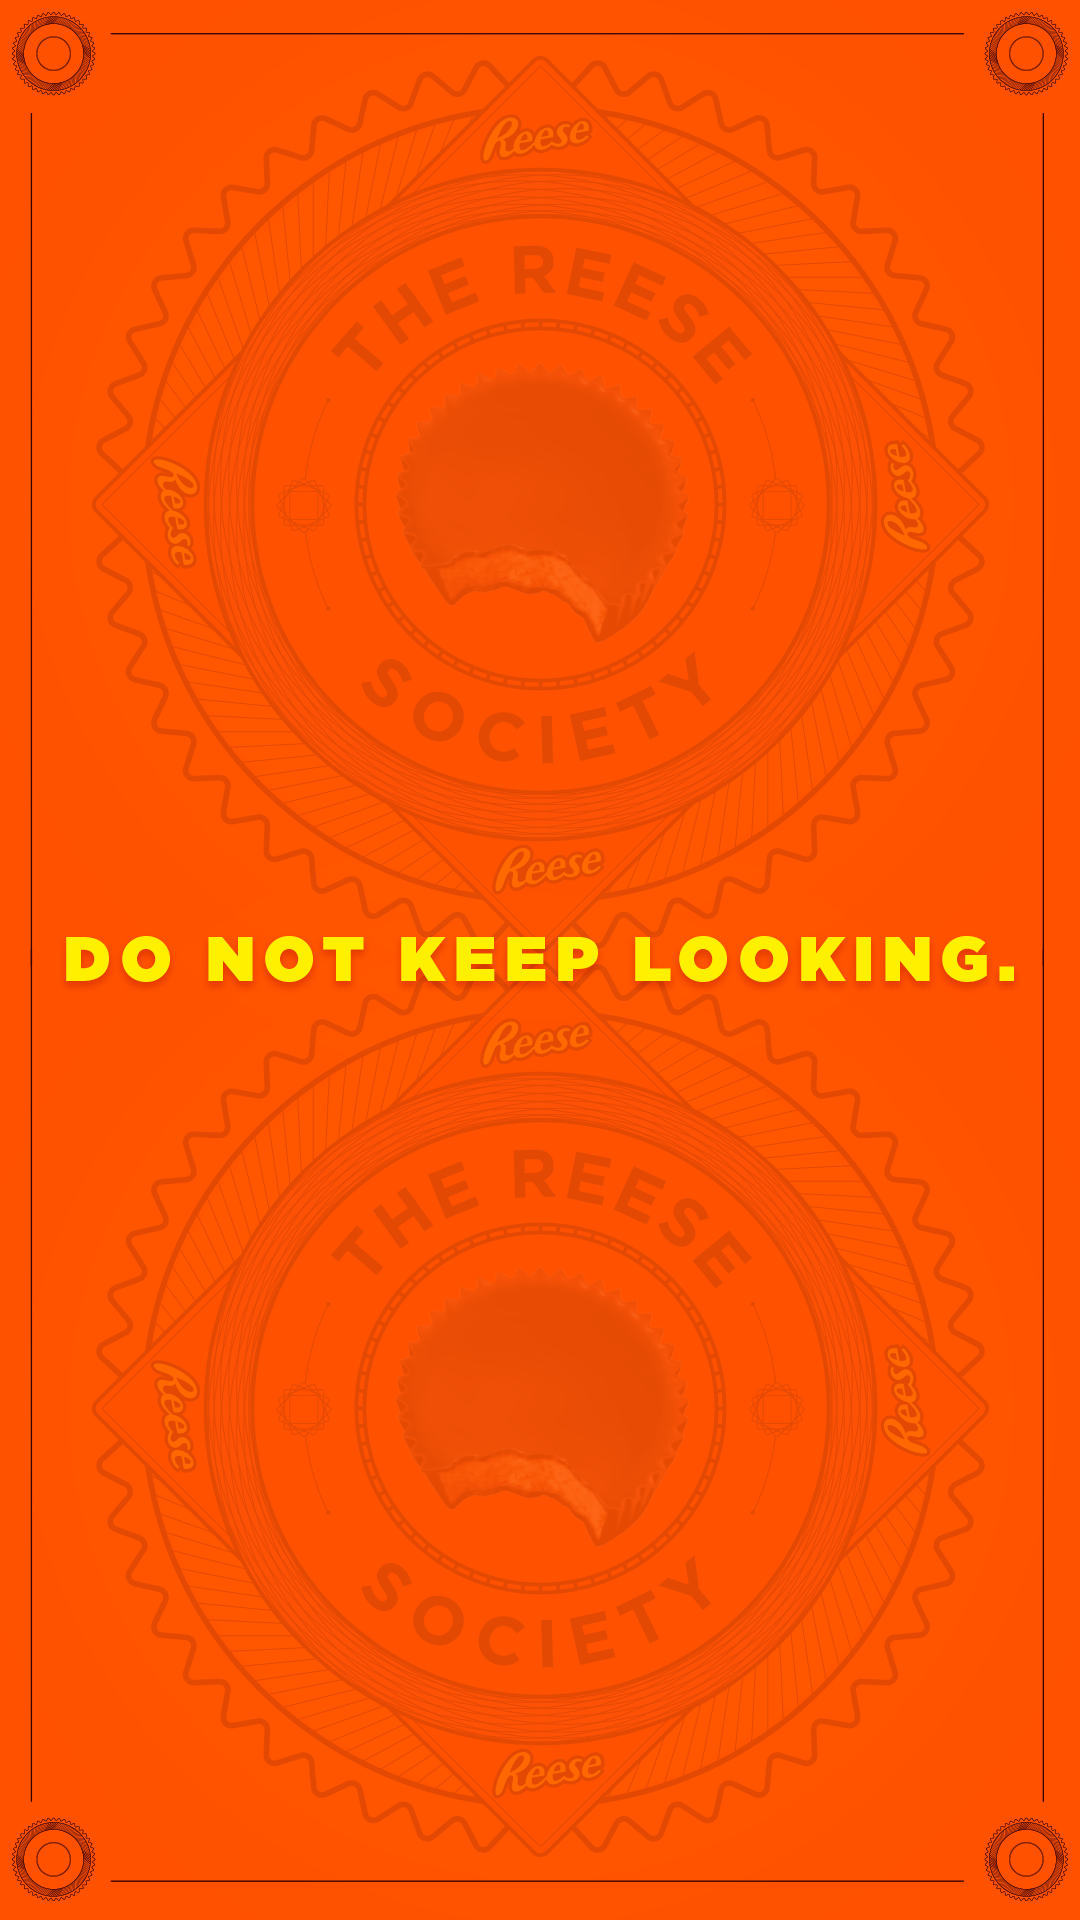 Reese-Society-IG_0002_Do-not-keep-looking.png